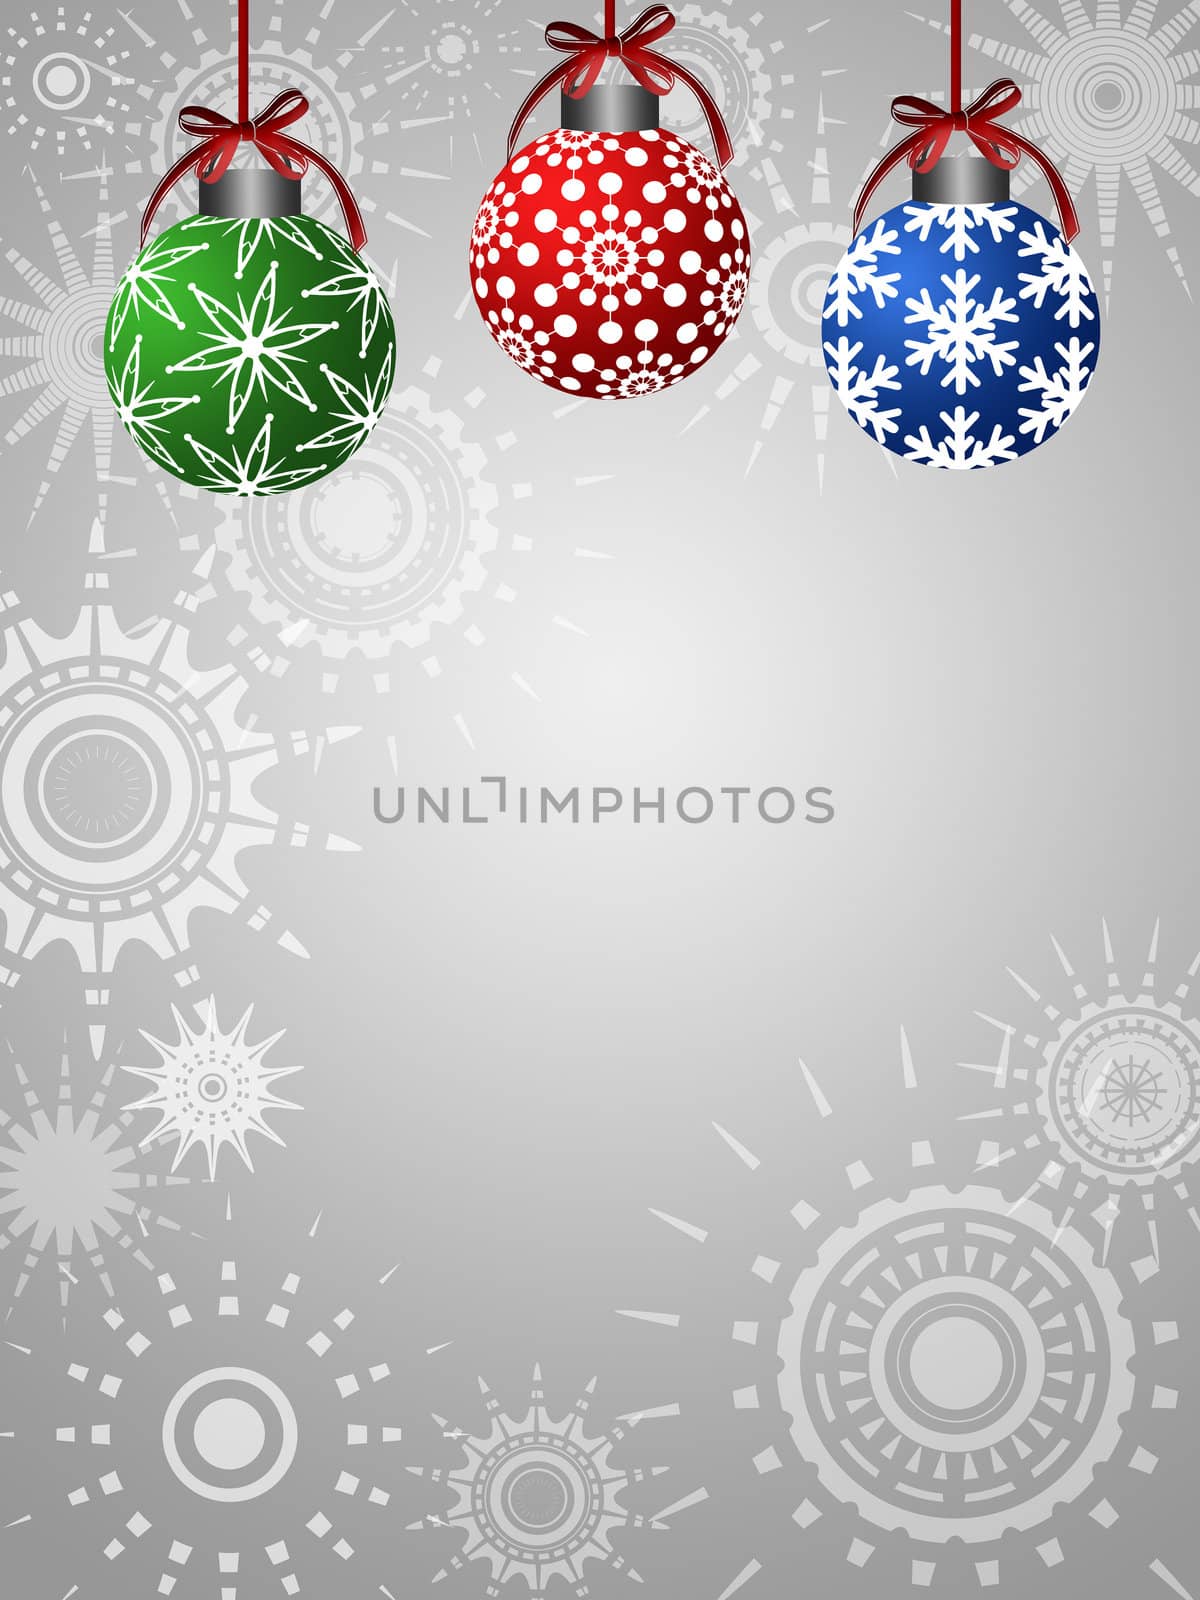 Three Colorful Ornaments on Silver Sun Star Background Illustration